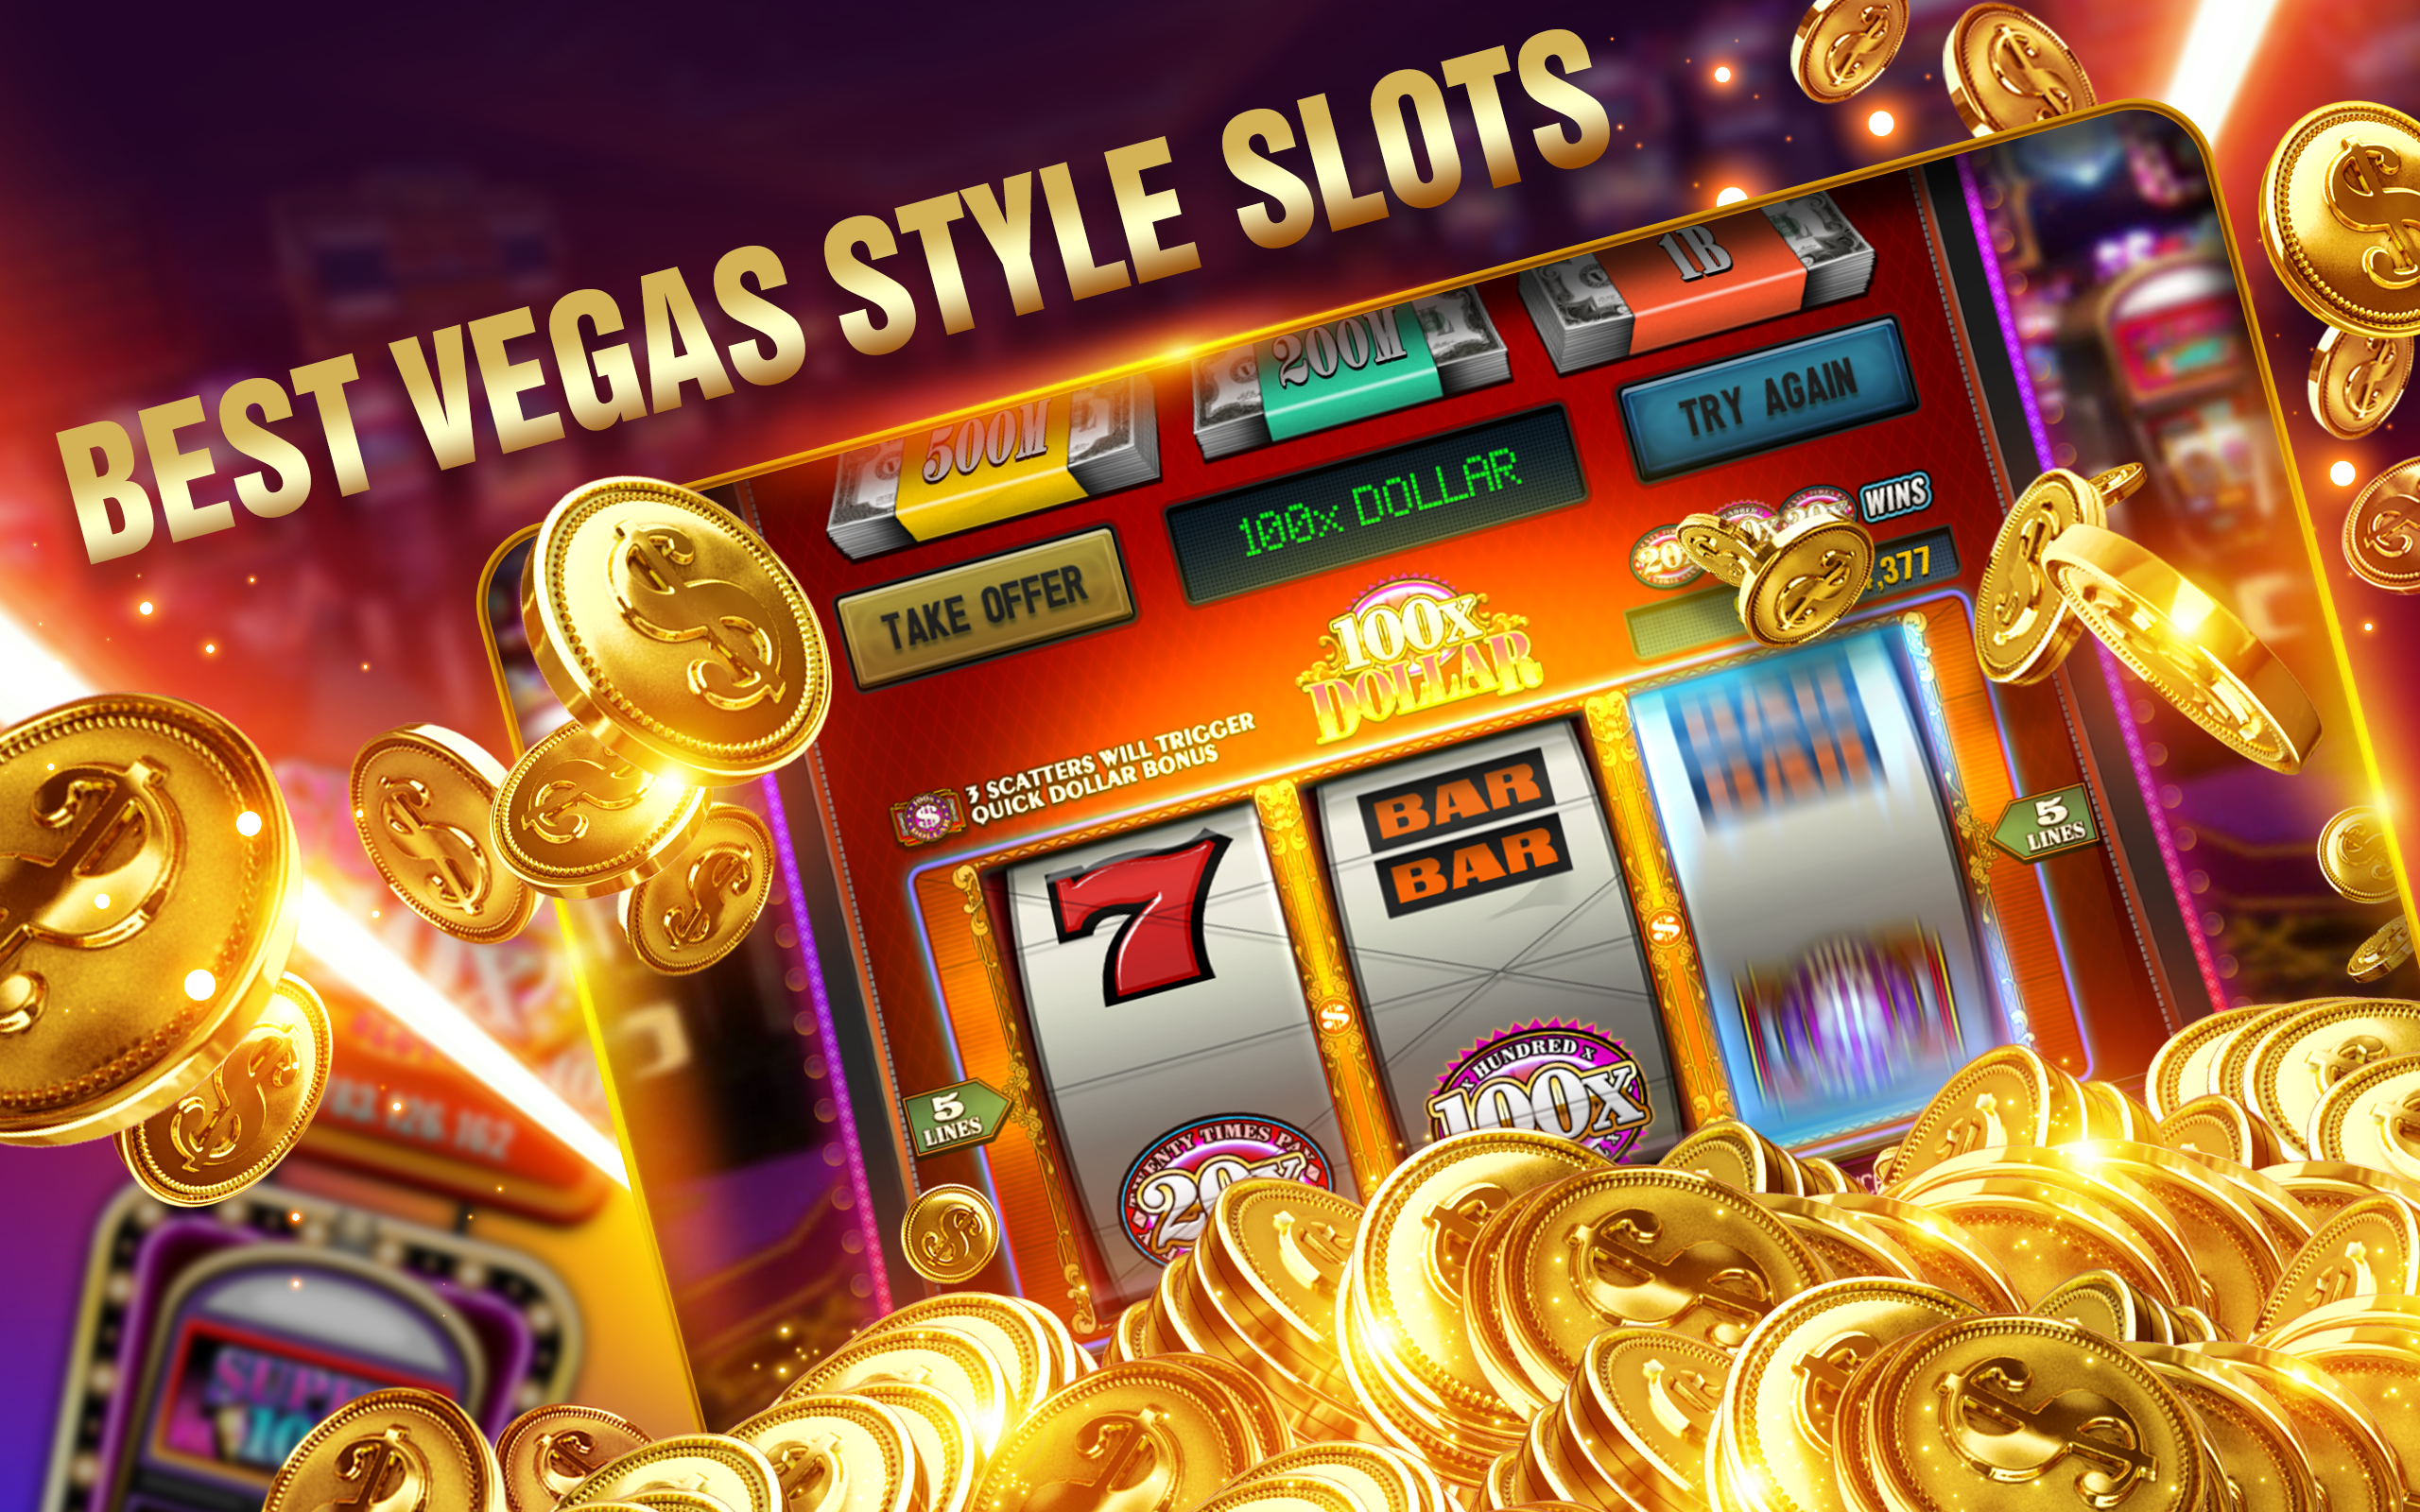 Just look at important details about slot games